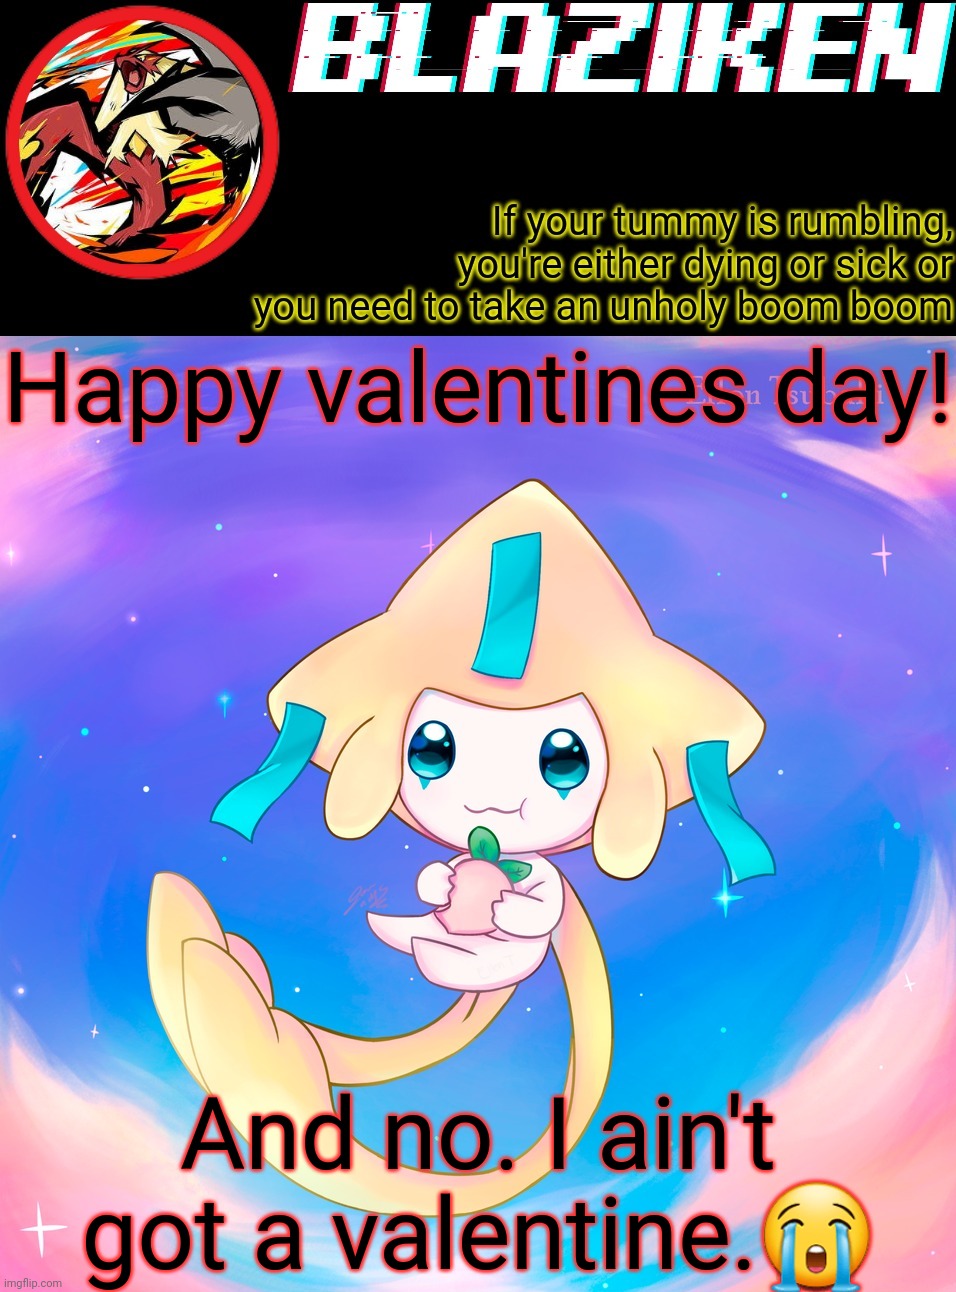 Blaziken's jirachi temp | Happy valentines day! And no. I ain't got a valentine.😭 | image tagged in blaziken's jirachi temp | made w/ Imgflip meme maker